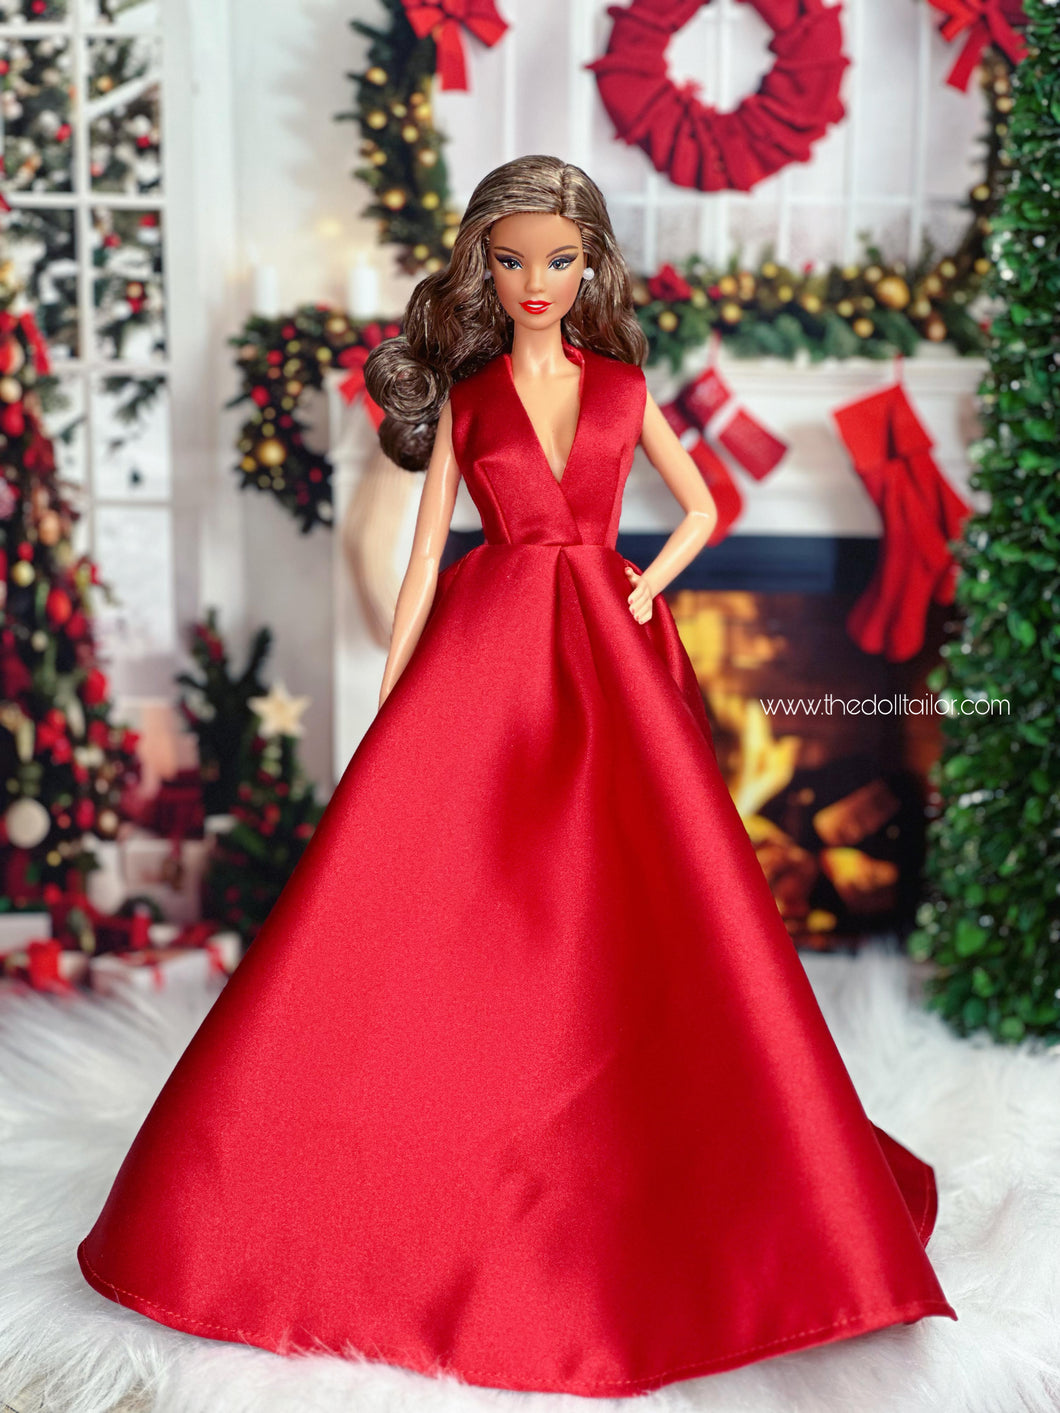 Red gown for barbie doll Christmas dress